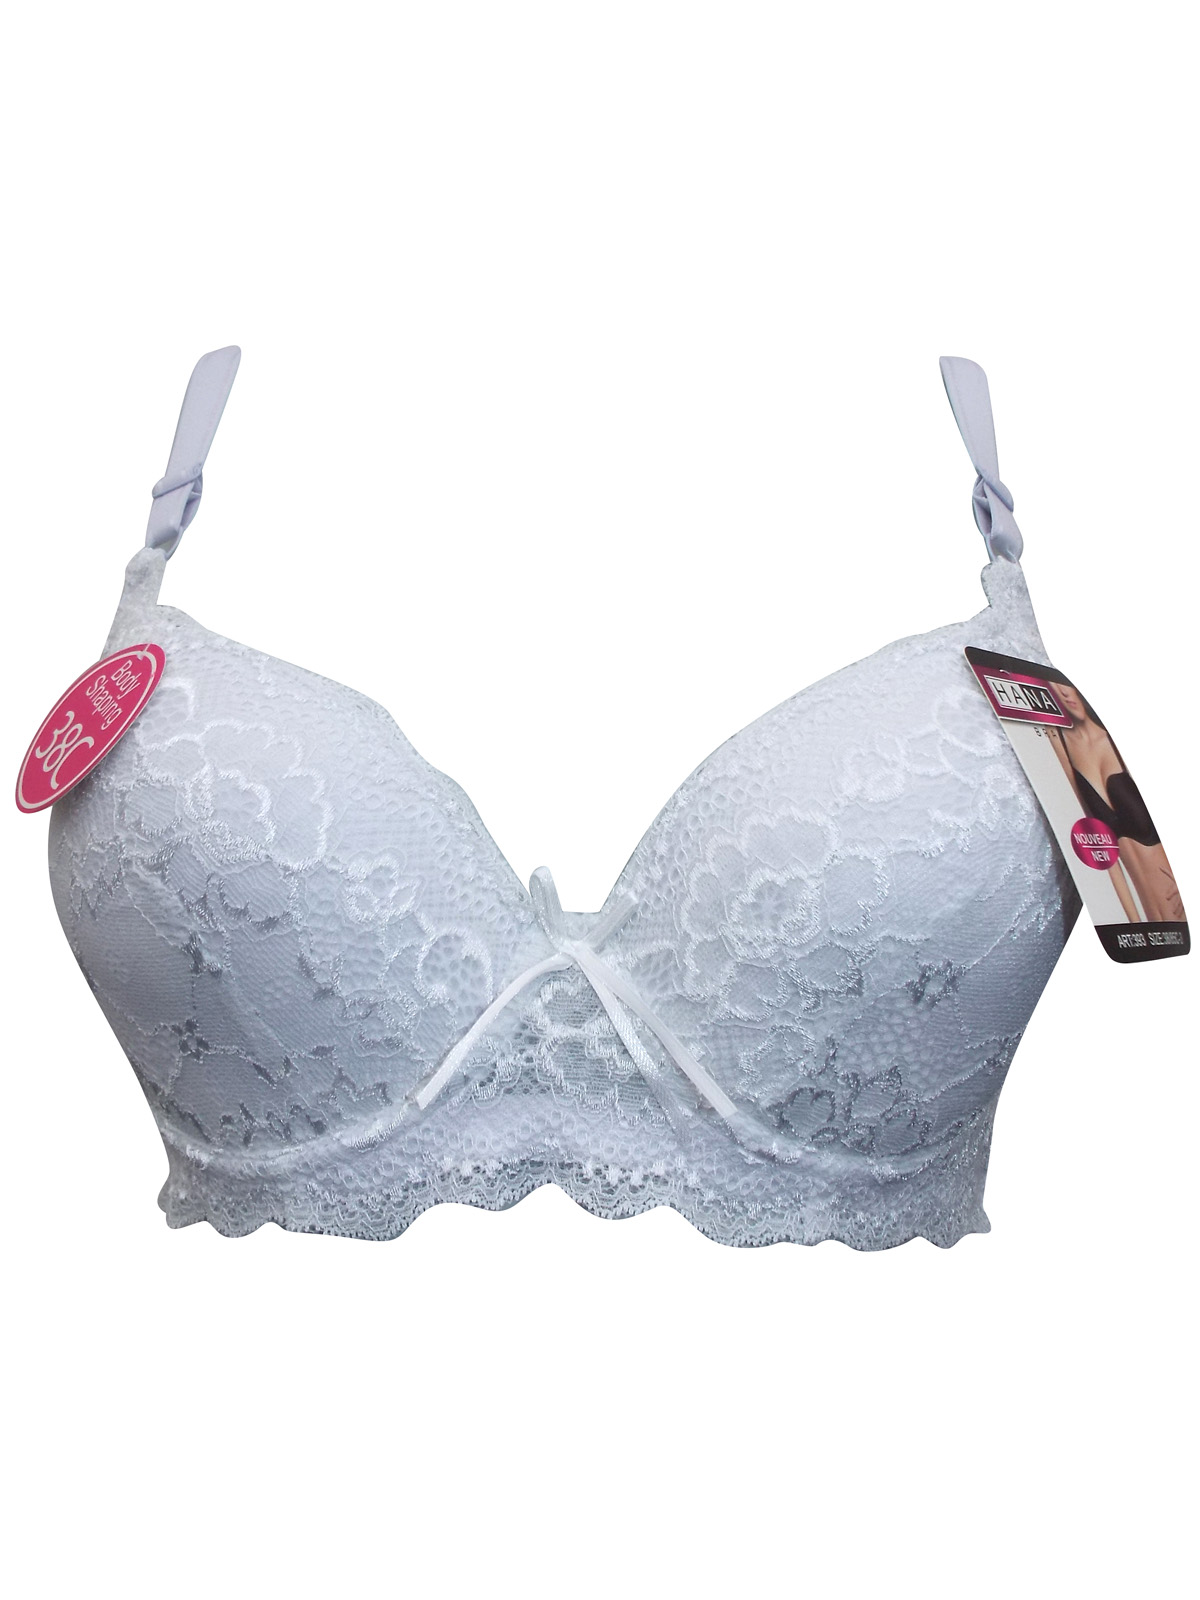 Hana - - Hana WHITE Floral Lace Padded & Wired Full Cup Bra - Size 38 to 48  (C cup)